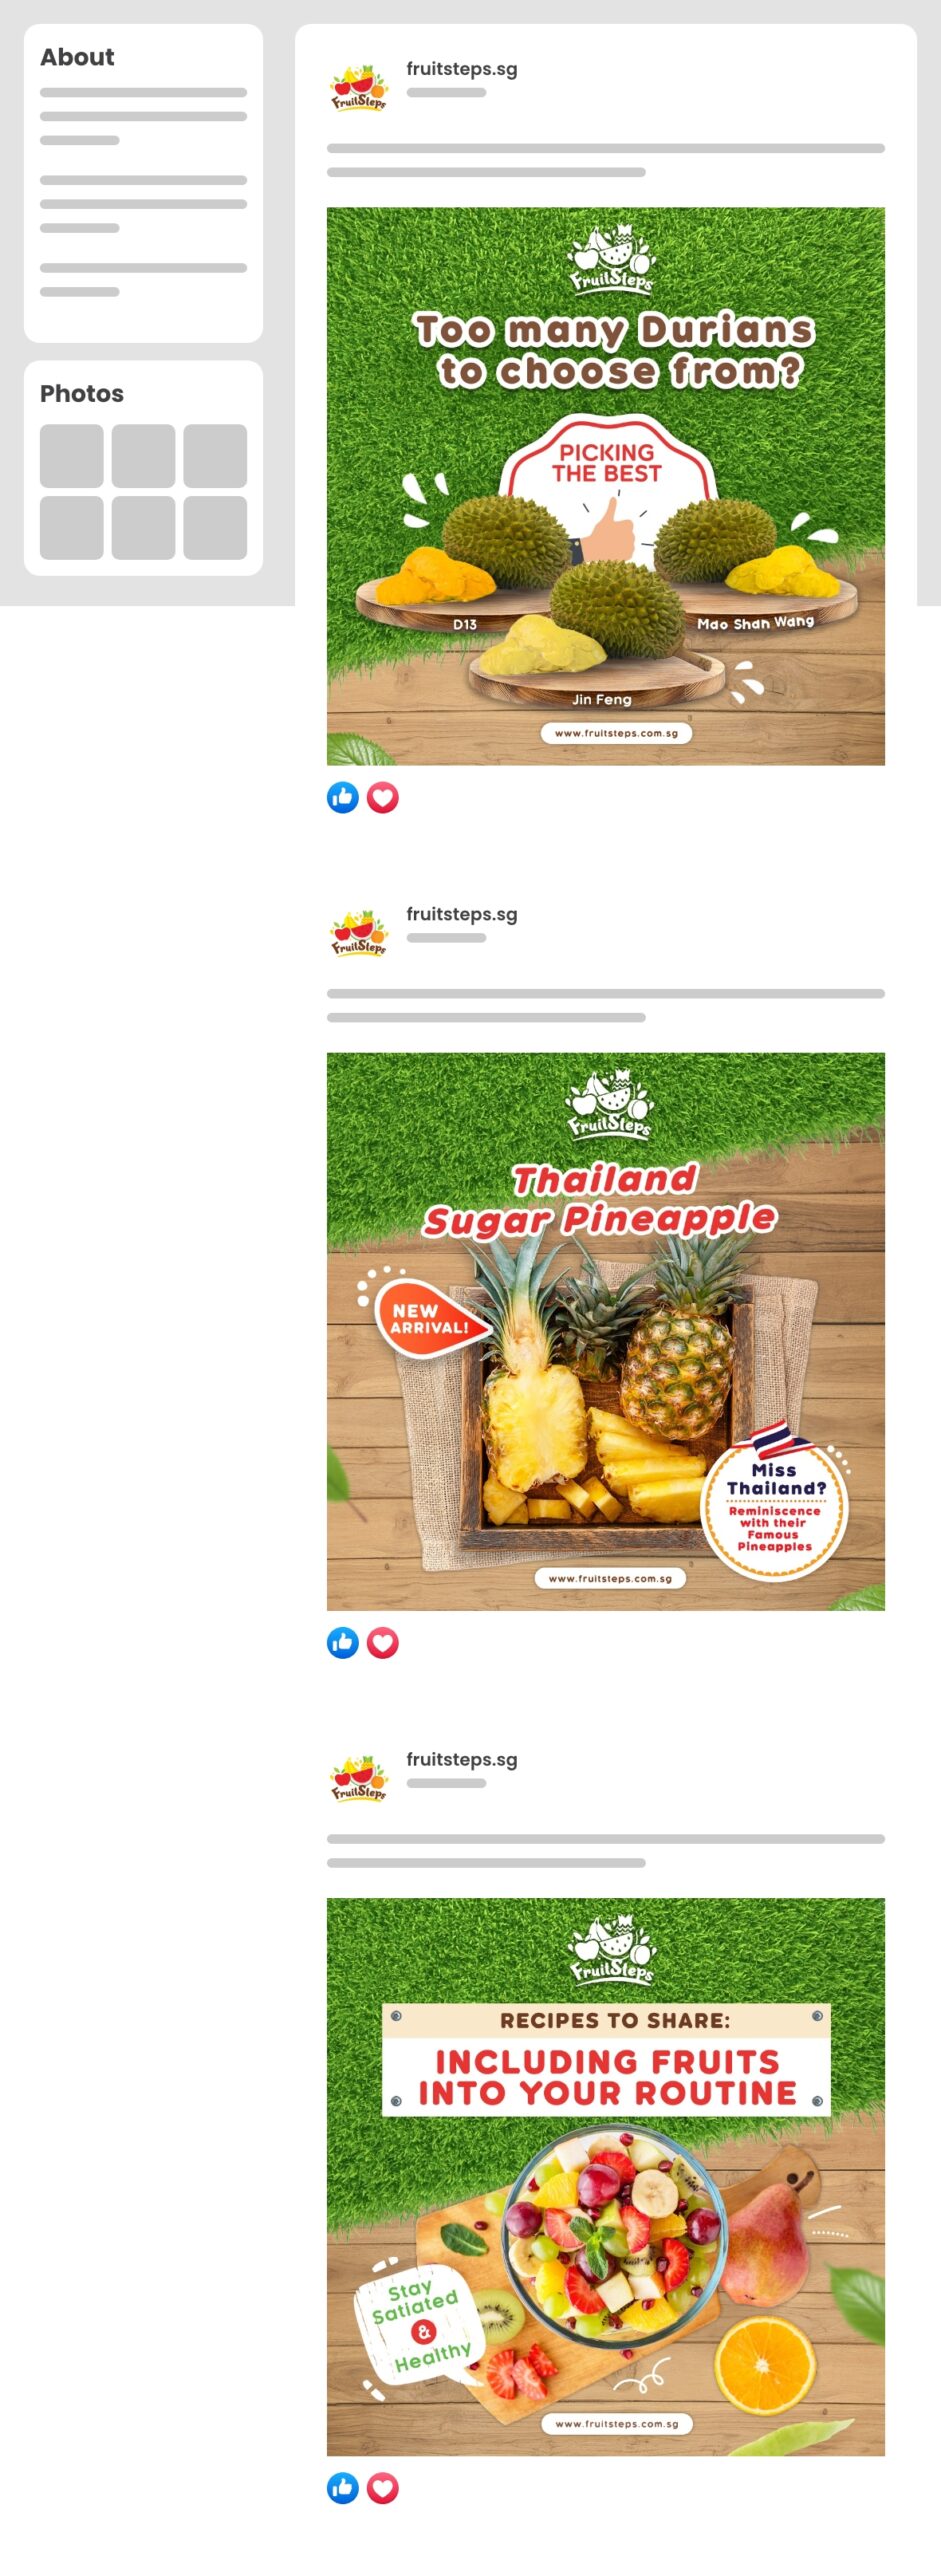 Social media marketing campaign example from Fruit Steps Singapore laptop screen